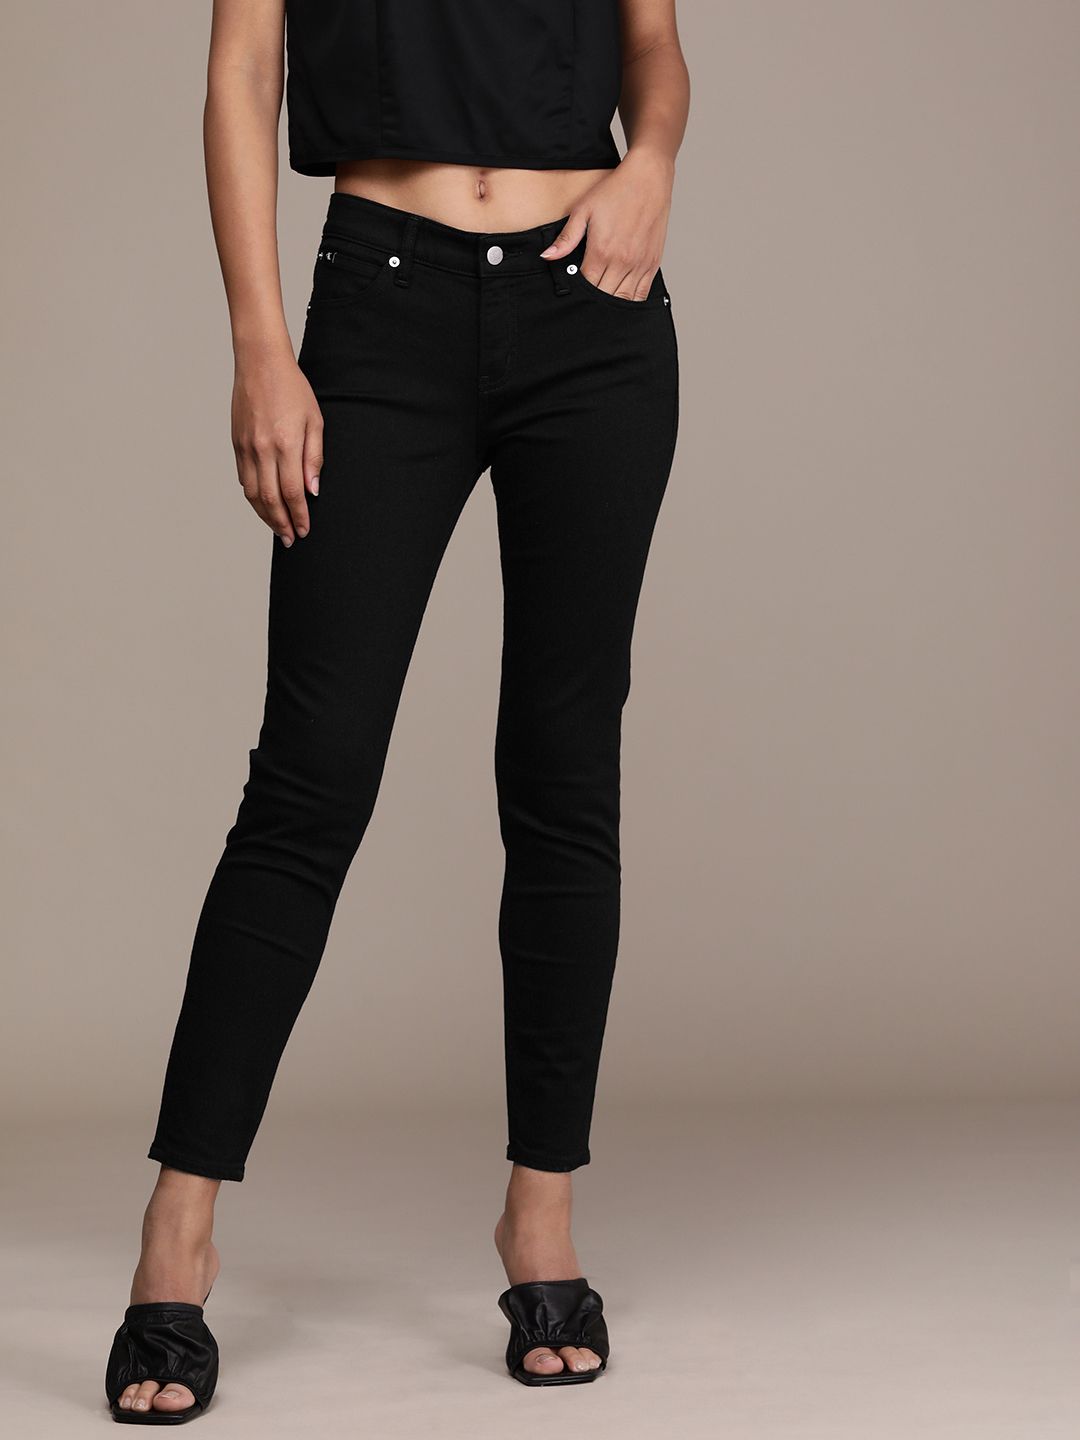 Calvin Klein Jeans Women Black Slim Fit Stretchable Jeans Price in India